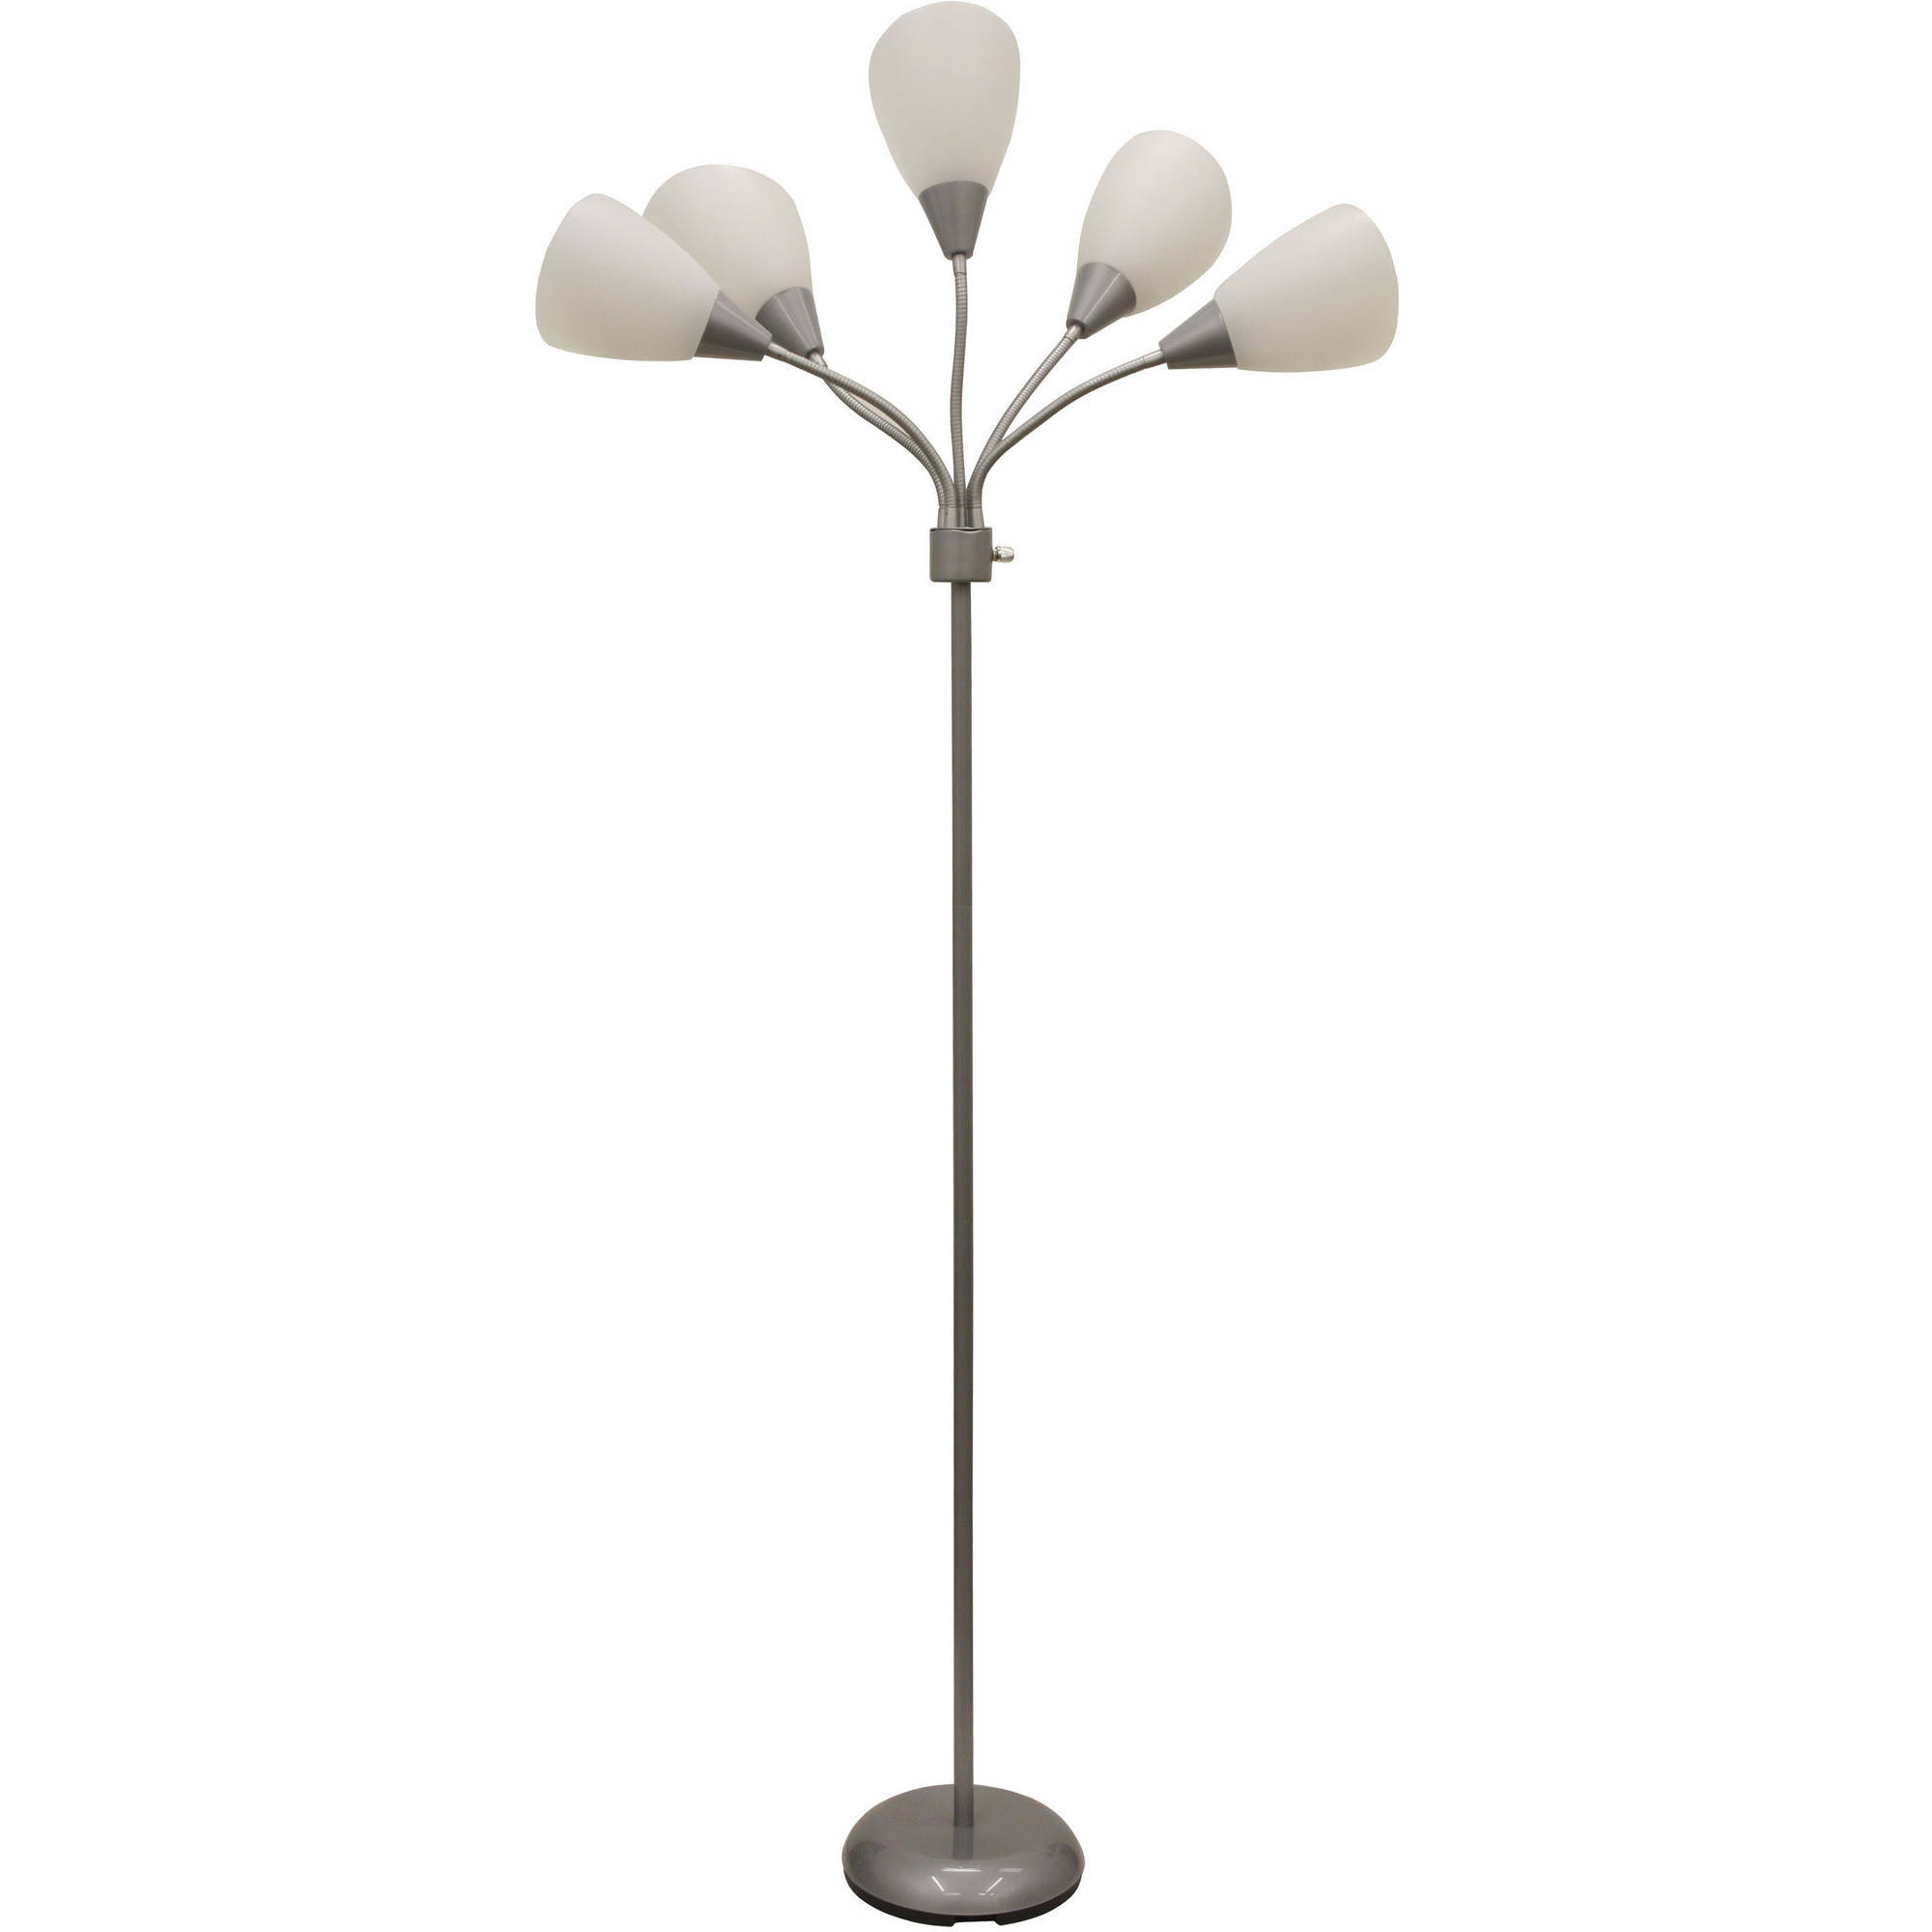 Mainstays 5 Light Floor Lamp Multiple Colors Walmart intended for size 2000 X 2000